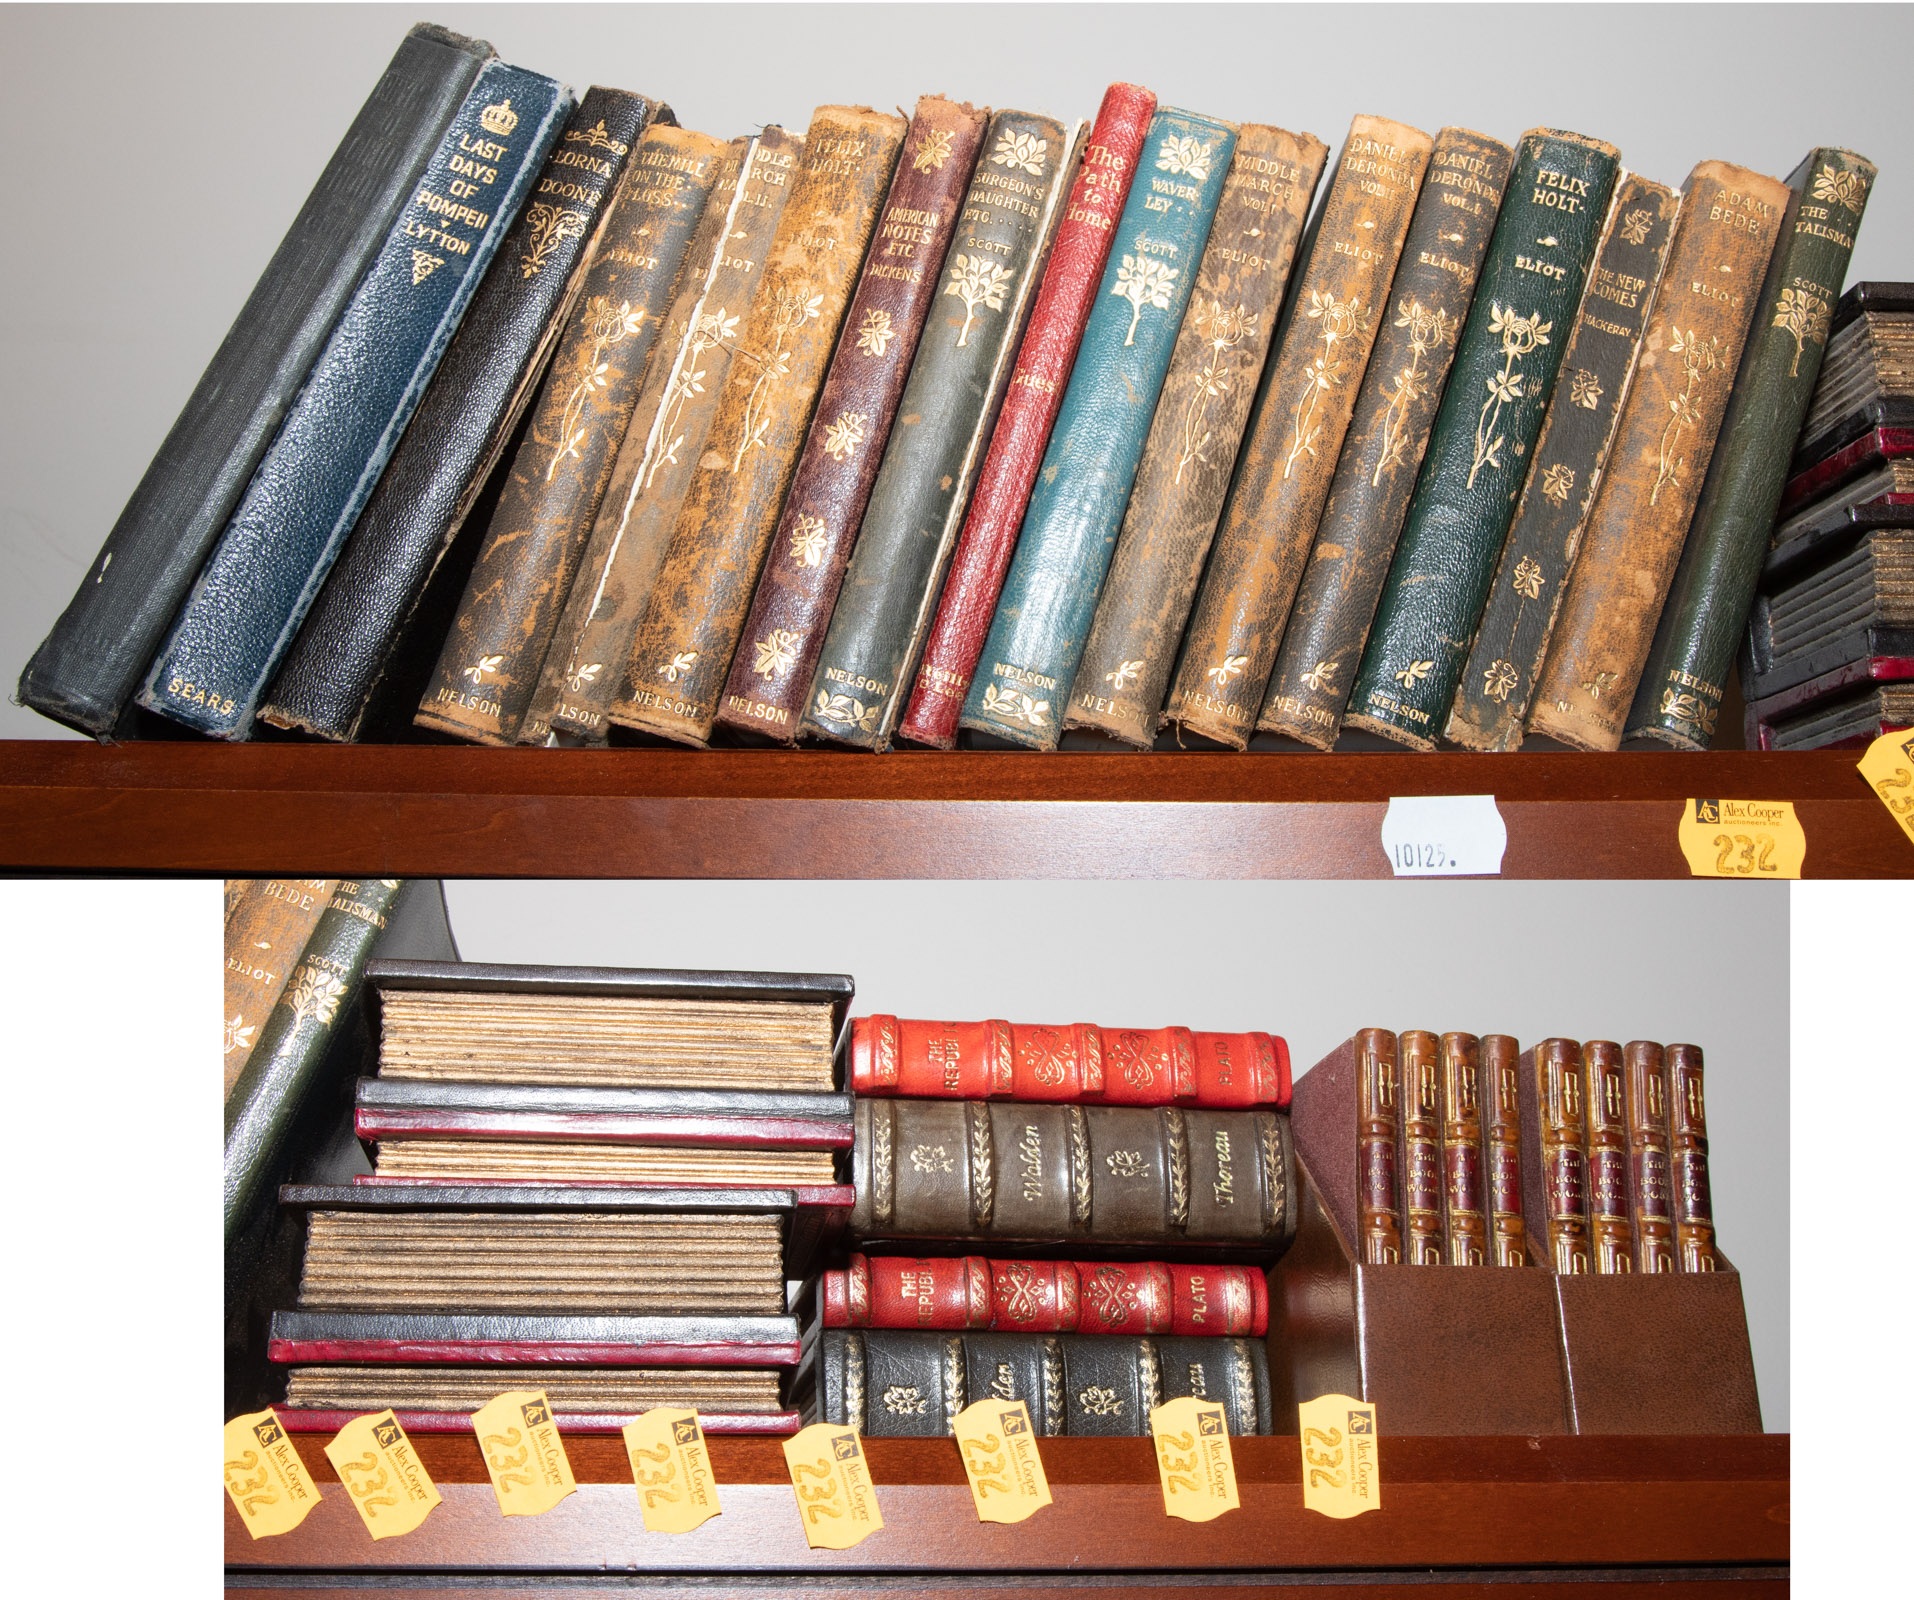 DECORATIVE LEATHER BINDINGS AND